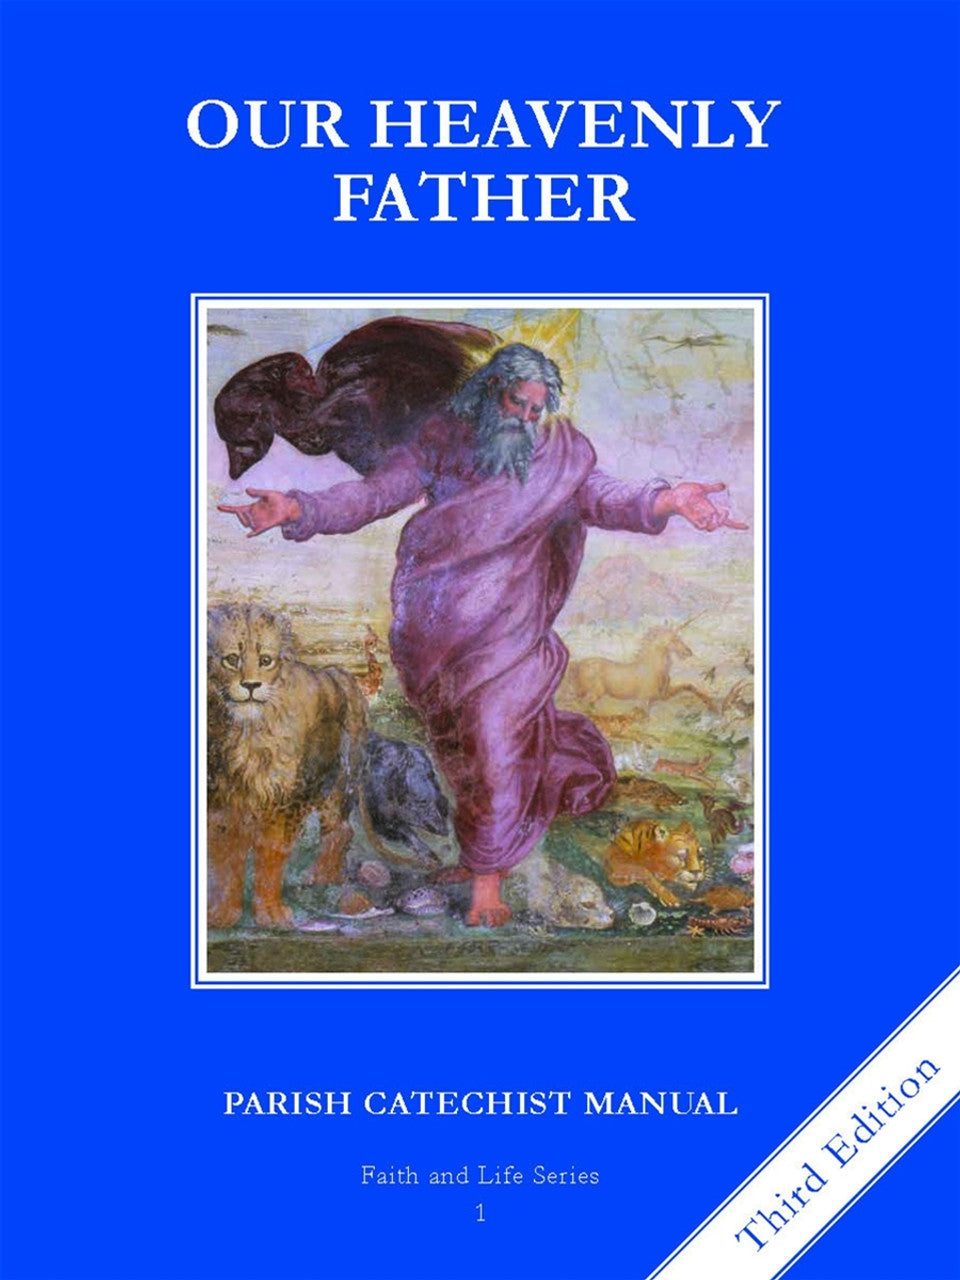 Our Heavenly Father | Grade 1 | Parish Catechist Manual [3rd Edition]